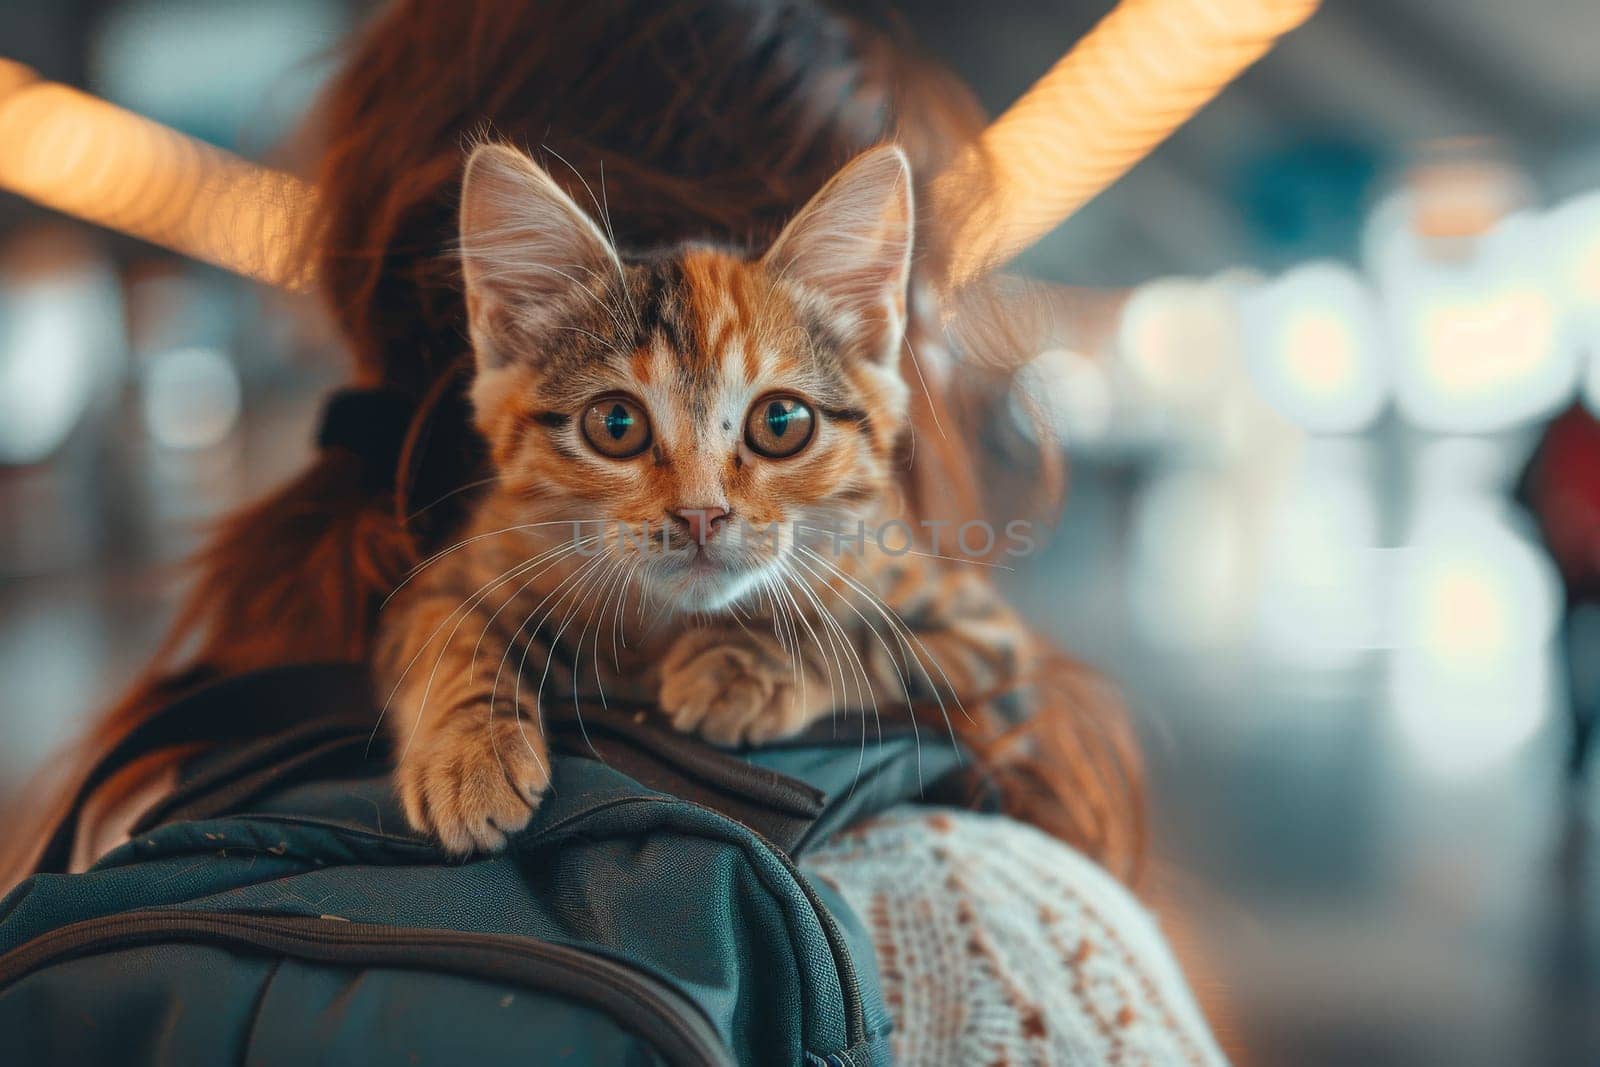 Woman and cat have a trip in vacation day with backpacker at airport.